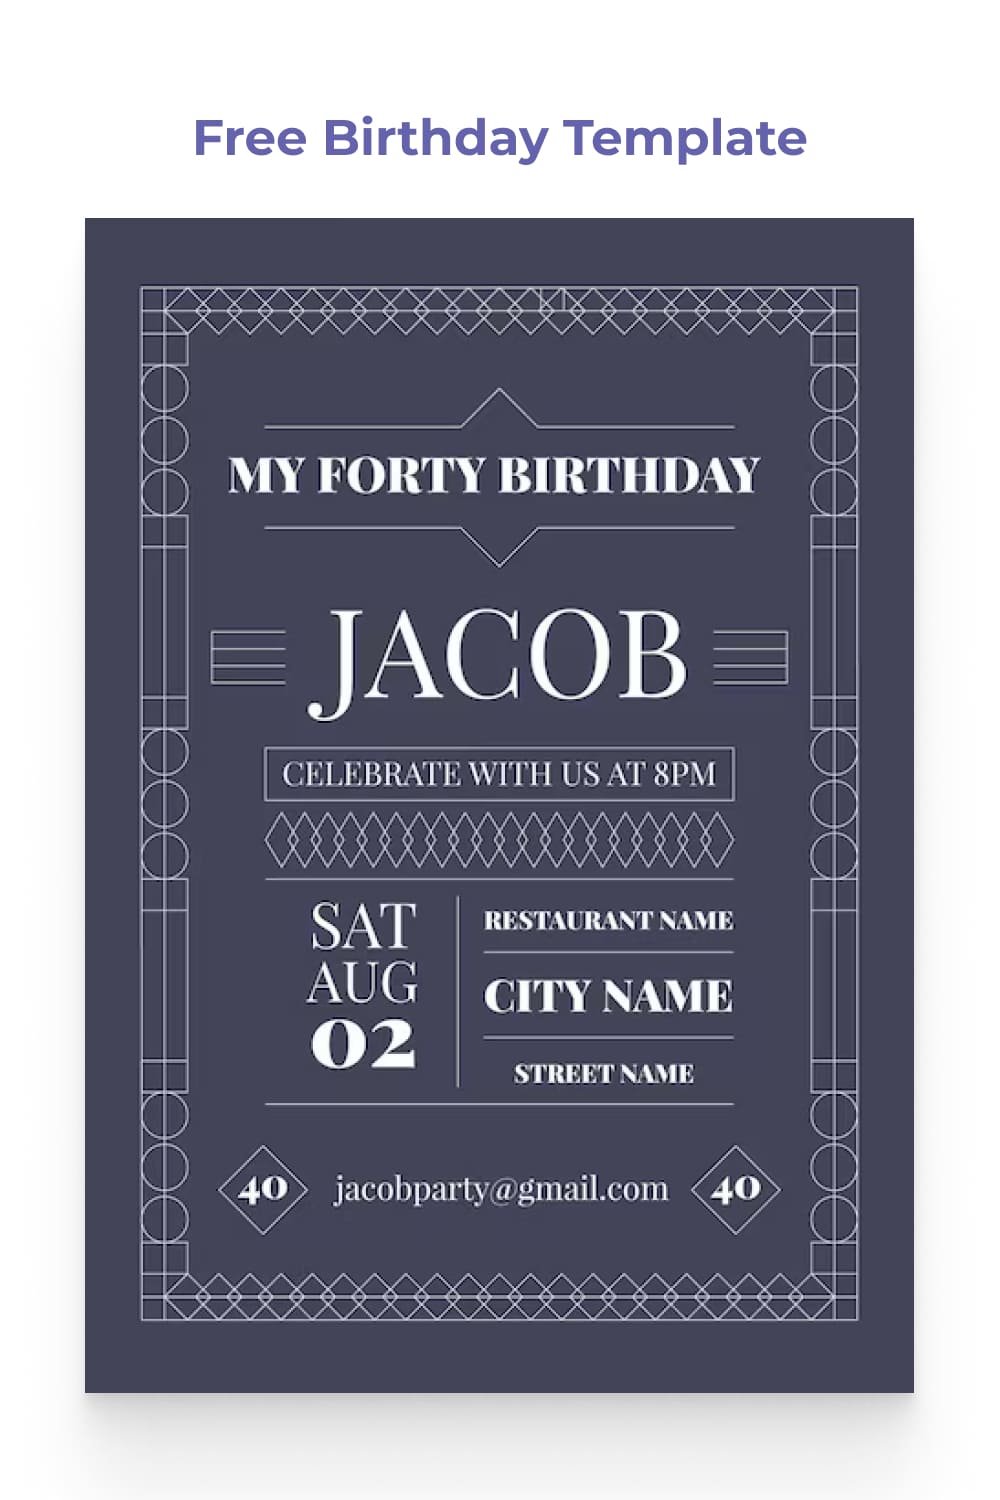 Birthday invitation with a gray background and a simple design.